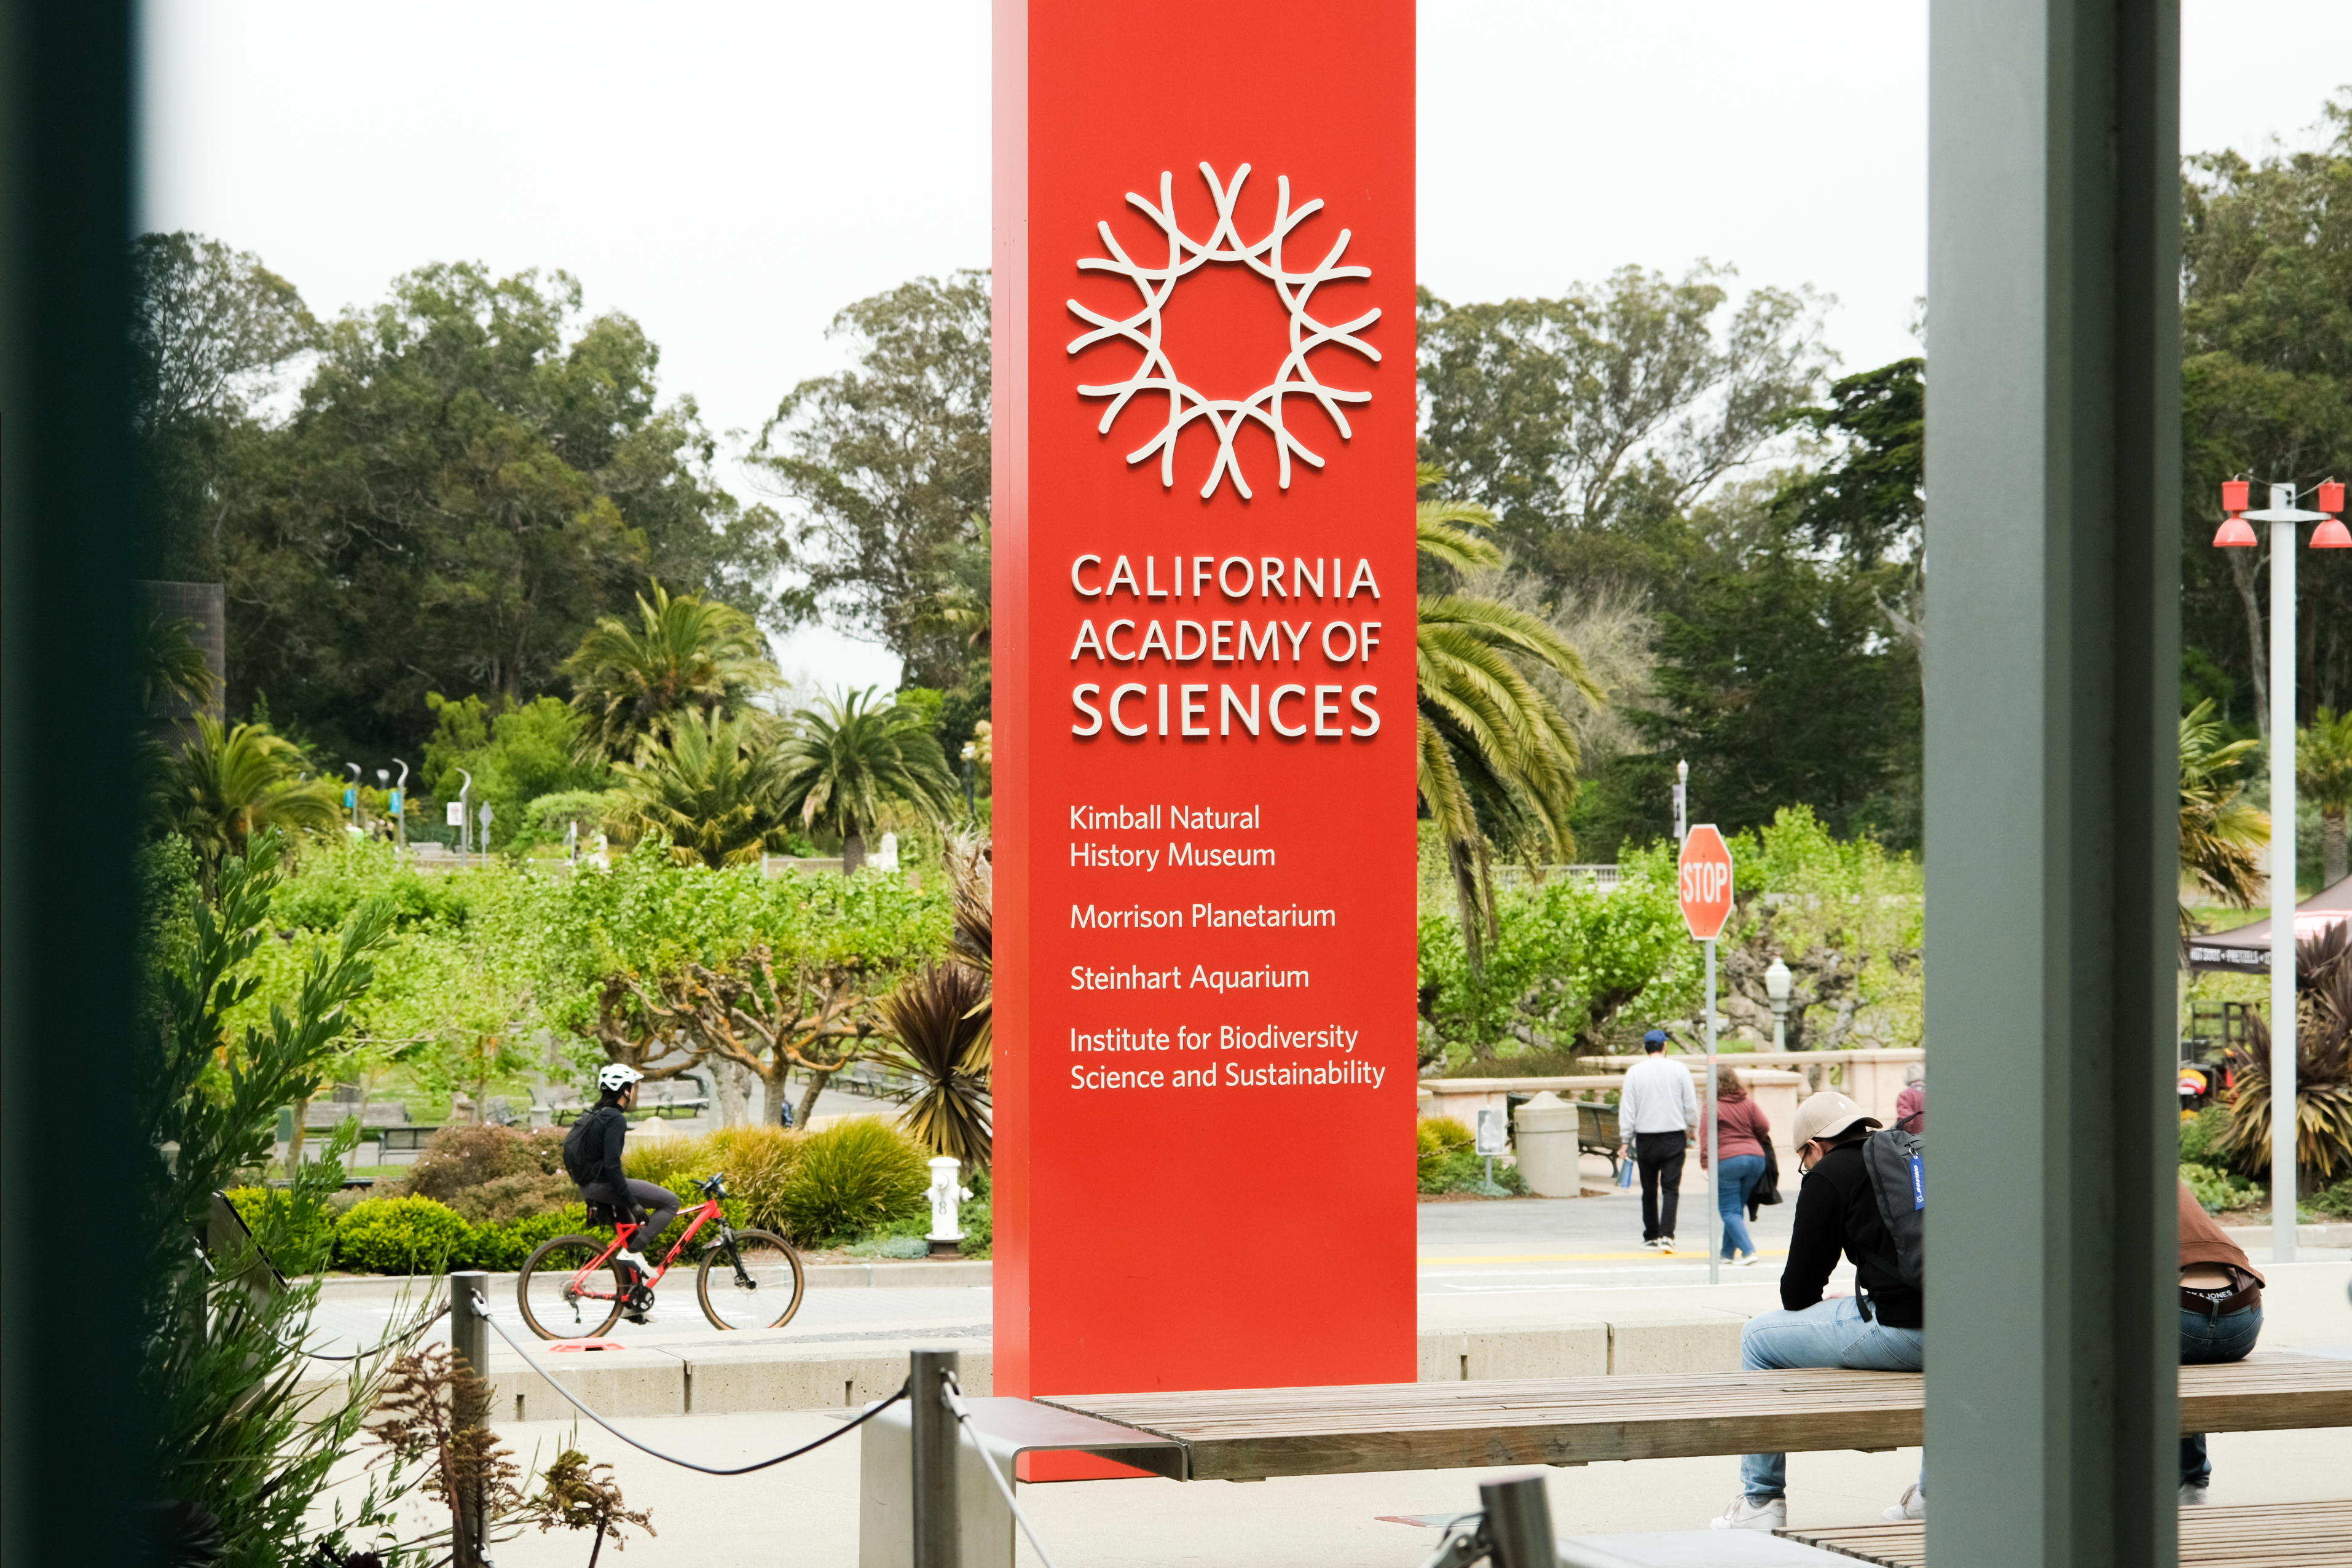 A bright red sign with &quot;California Academy of Sciences&quot; stands before lush greenery, listing museum attractions. Cyclists and pedestrians are nearby.